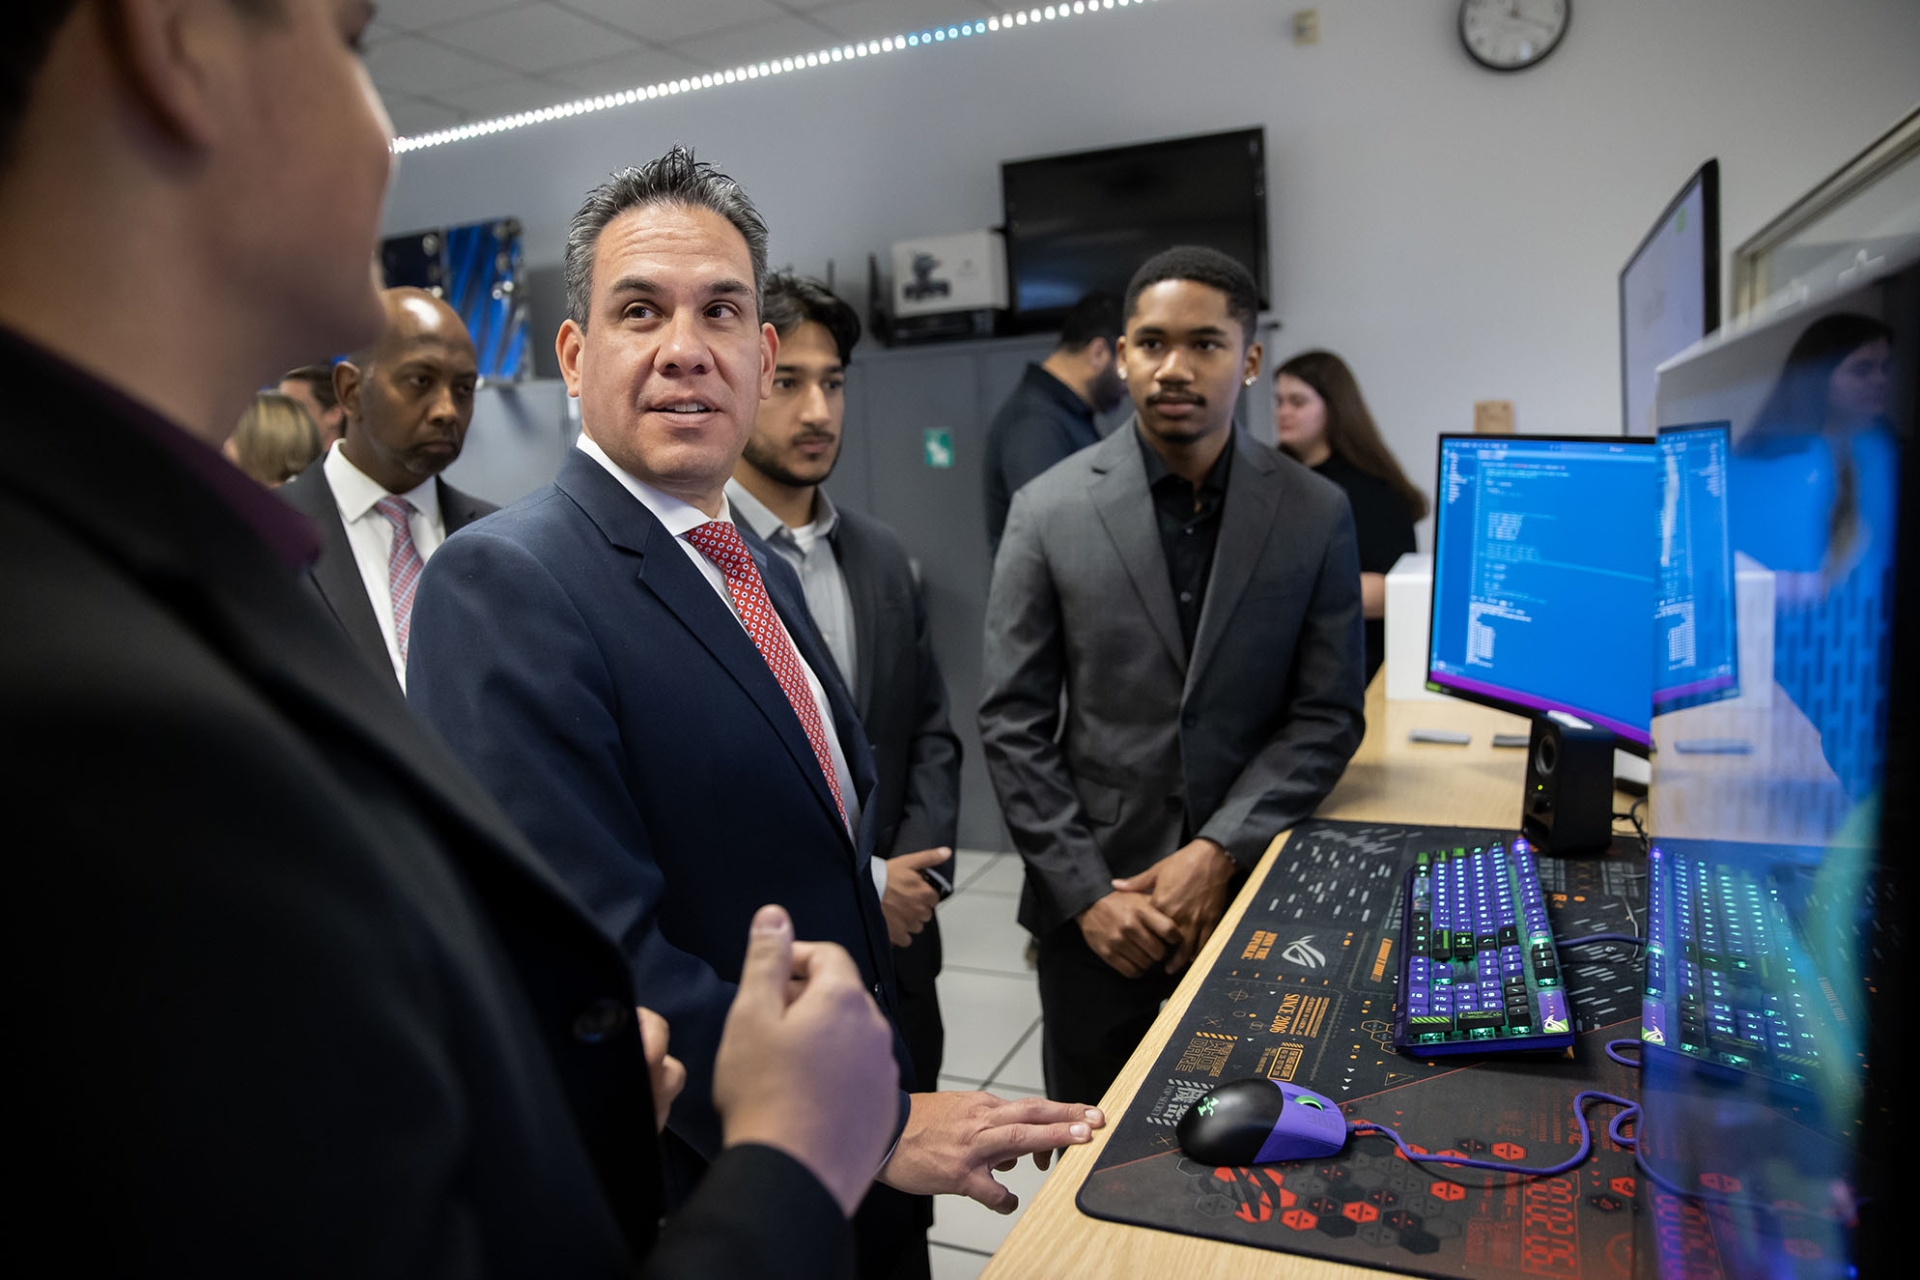 U.S. Rep. Pete Aguilar talks with students about on some of the work done at the CSUSB Cybersecurity Center.